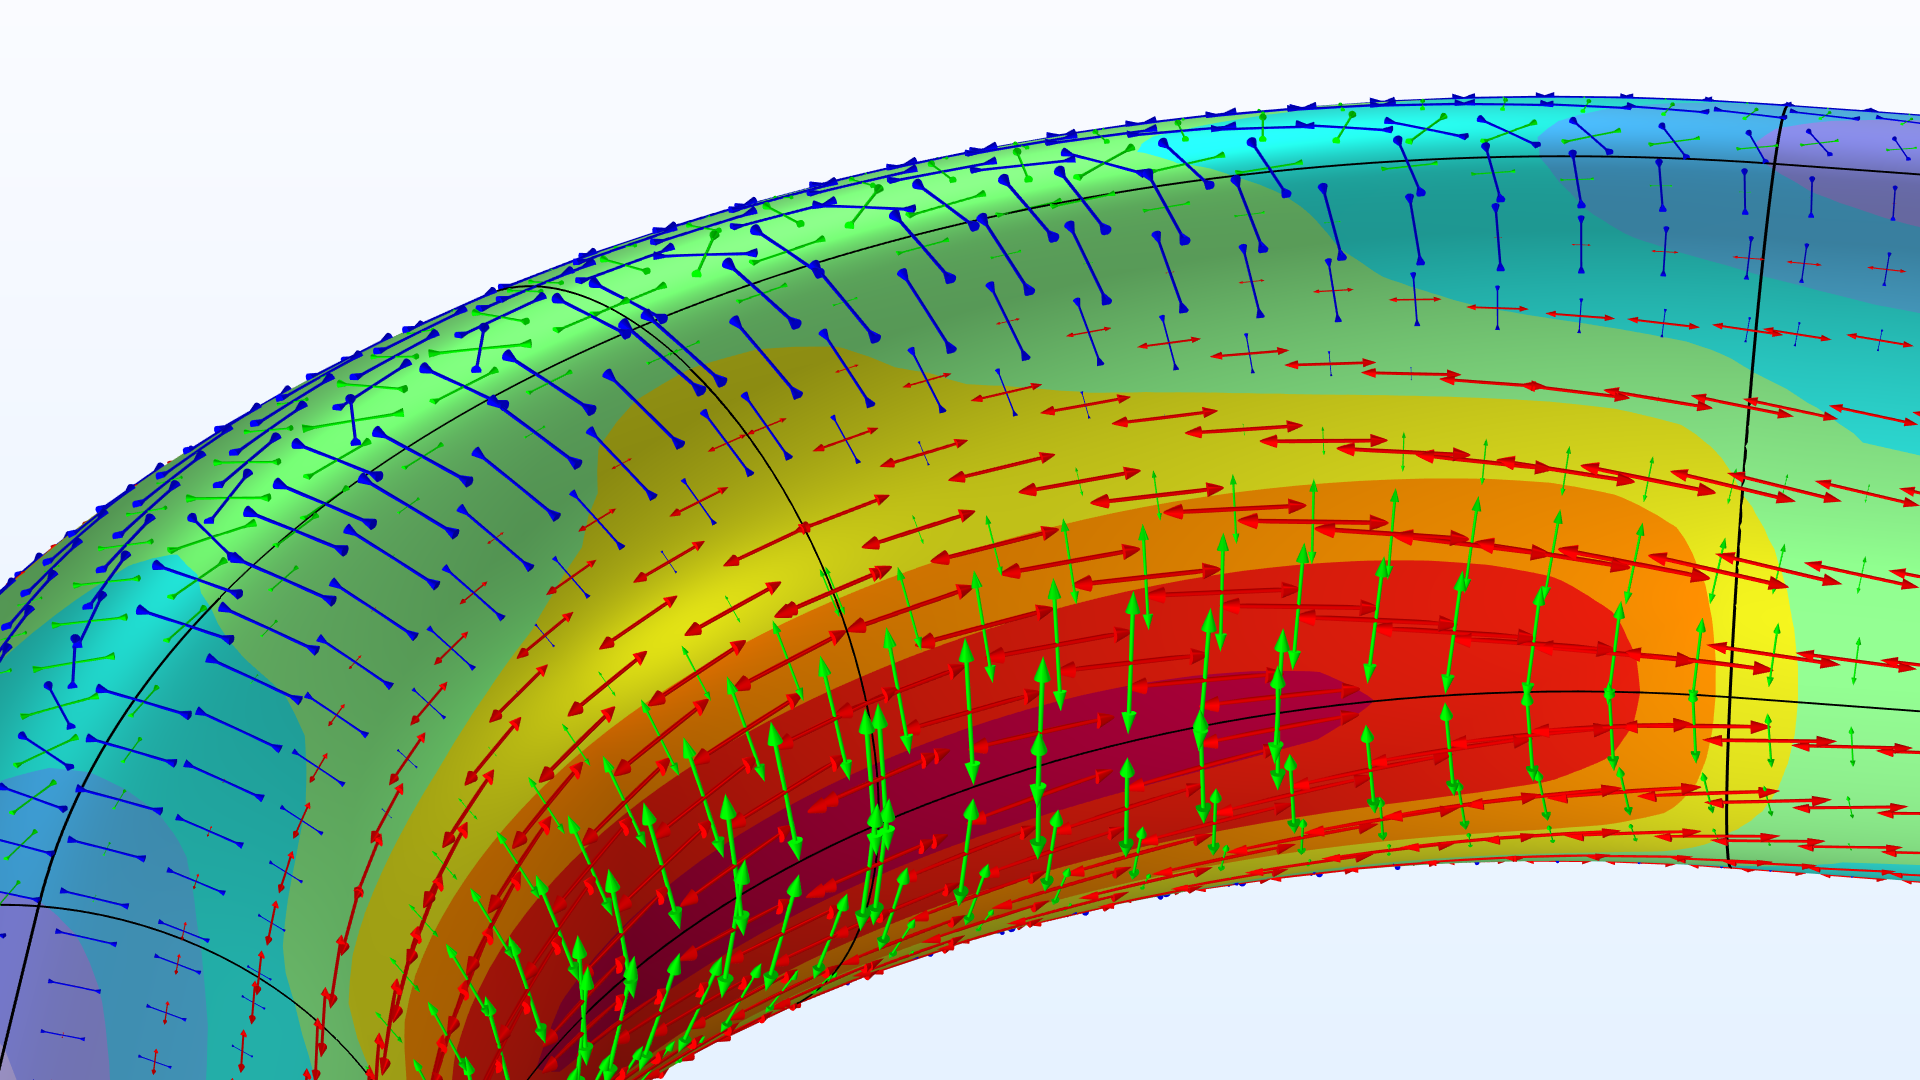 A close-up view of the pipe bend showing the Von Mises stress and principal stresses for a wall thickness of 20 percent.